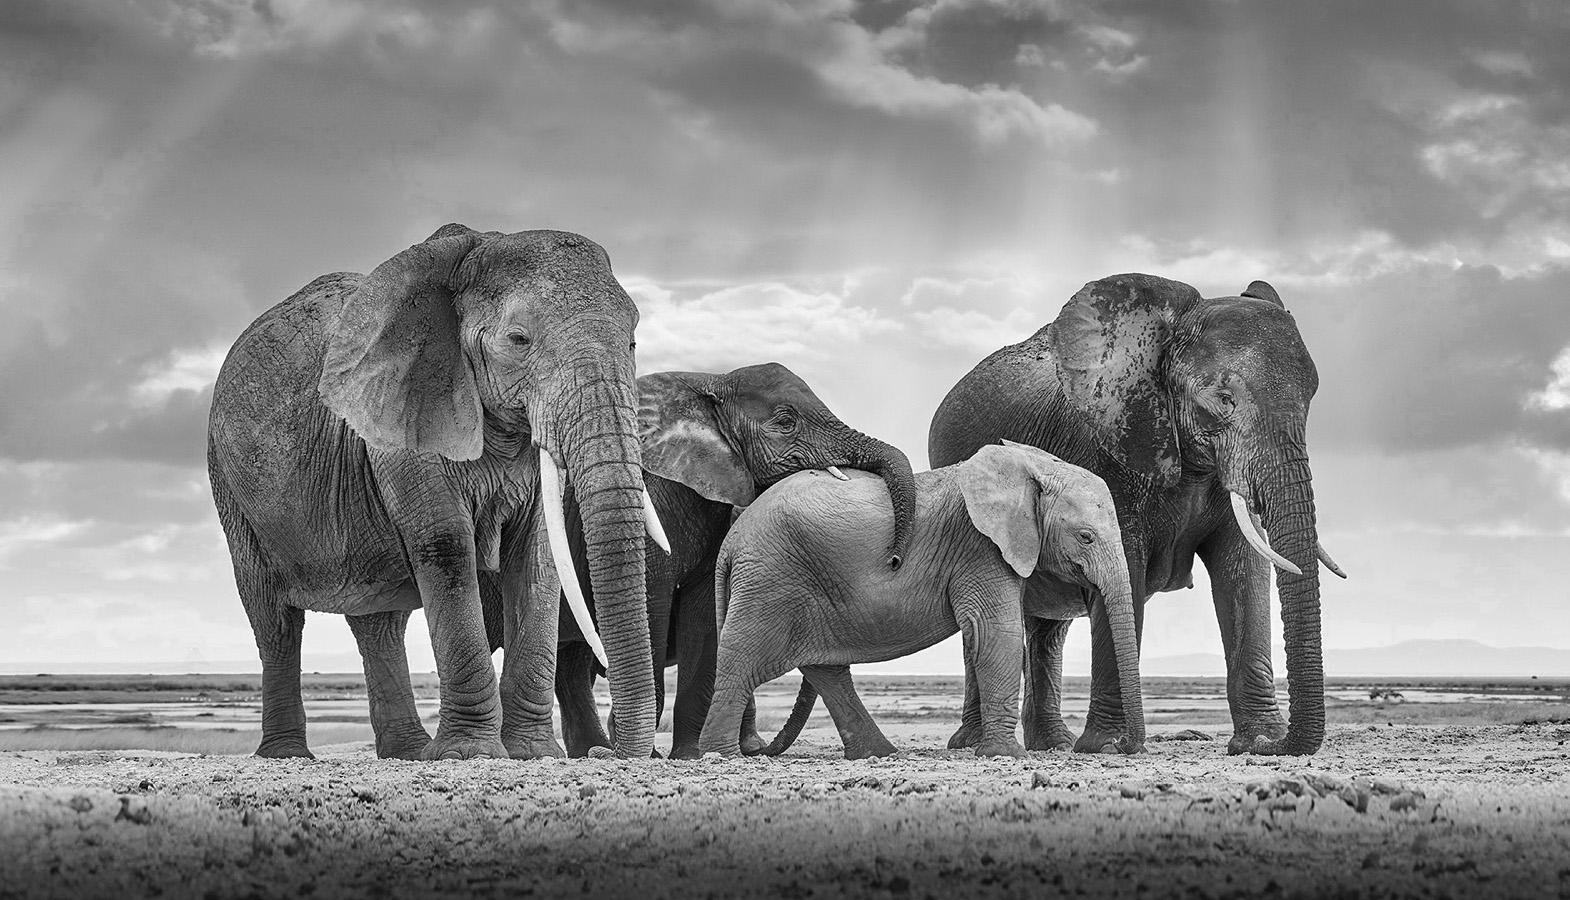 All available sizes & editions for each size of this photograph:
12" x 20" Edition of 8
22” x 34" Edition of 8
32” x 48” Edition of 10

This project Before Ever After was less about documenting the dwindling species than it was an effort re-present